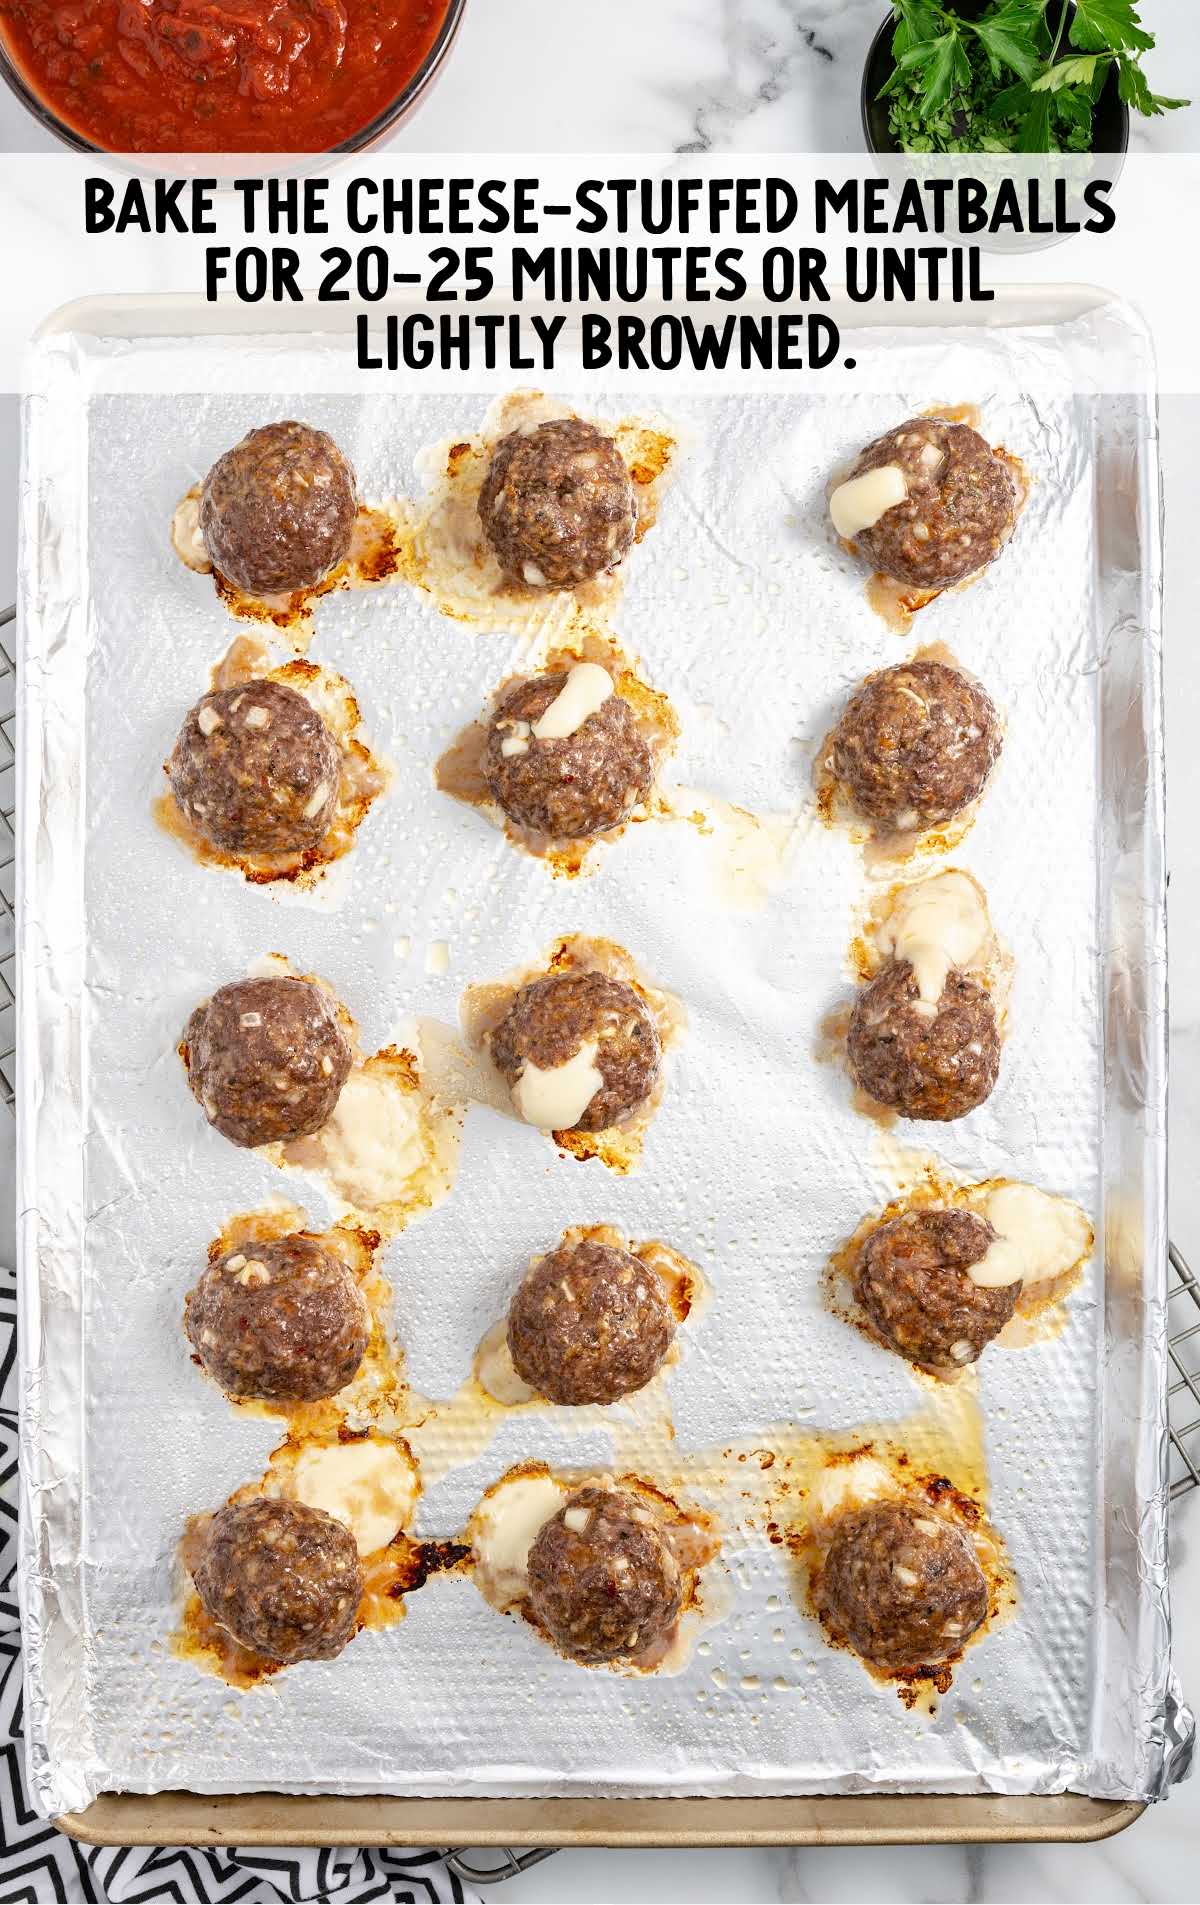 meatballs baked for 20-25 minutes